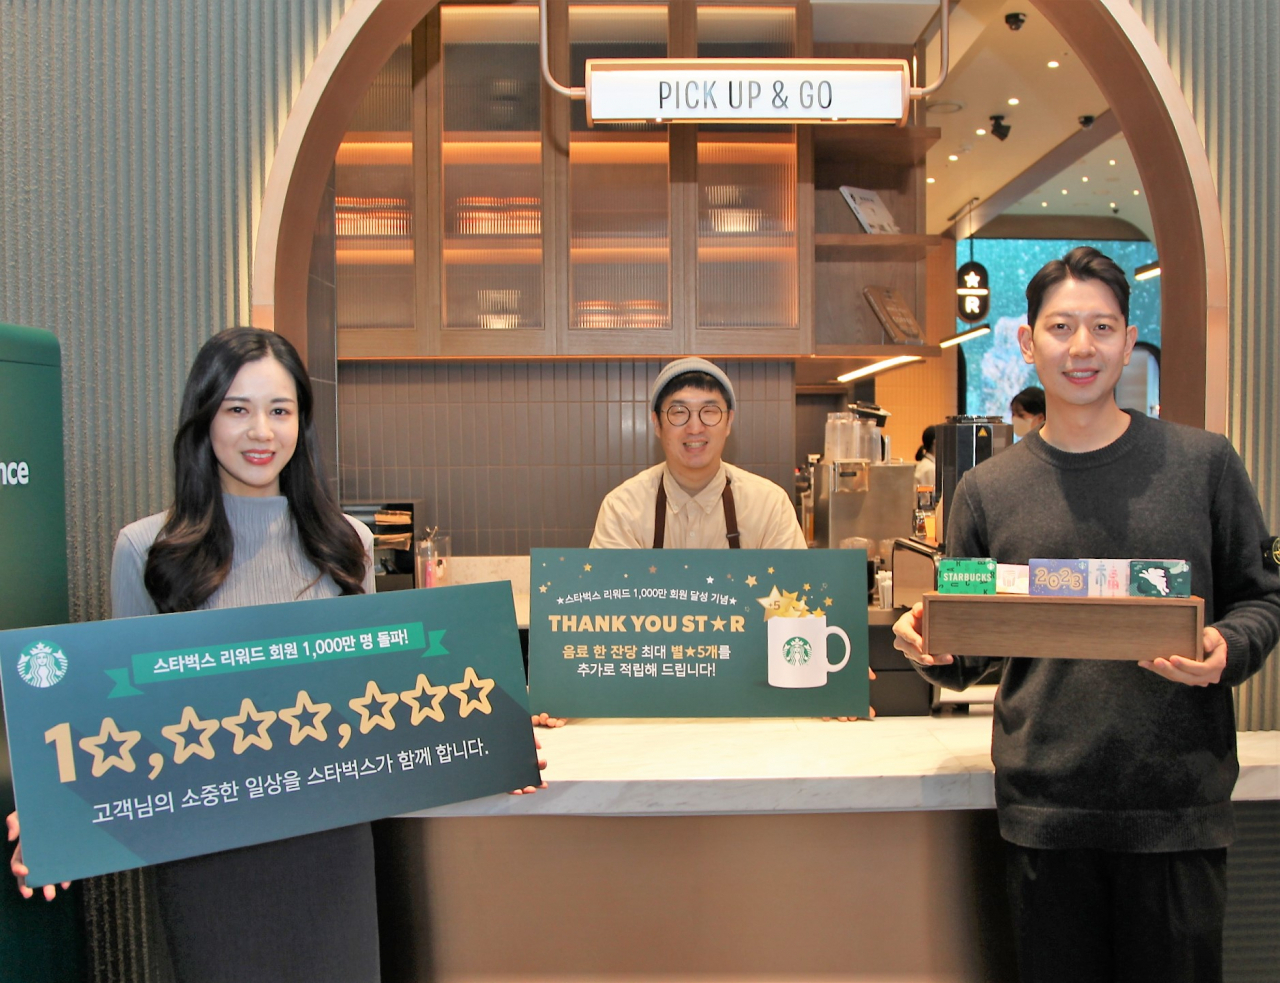 Starbucks Korea holds a gift event from Feb.1 to Feb.7, giving up to 5 stars per drink to its members. (Starbucks Korea)